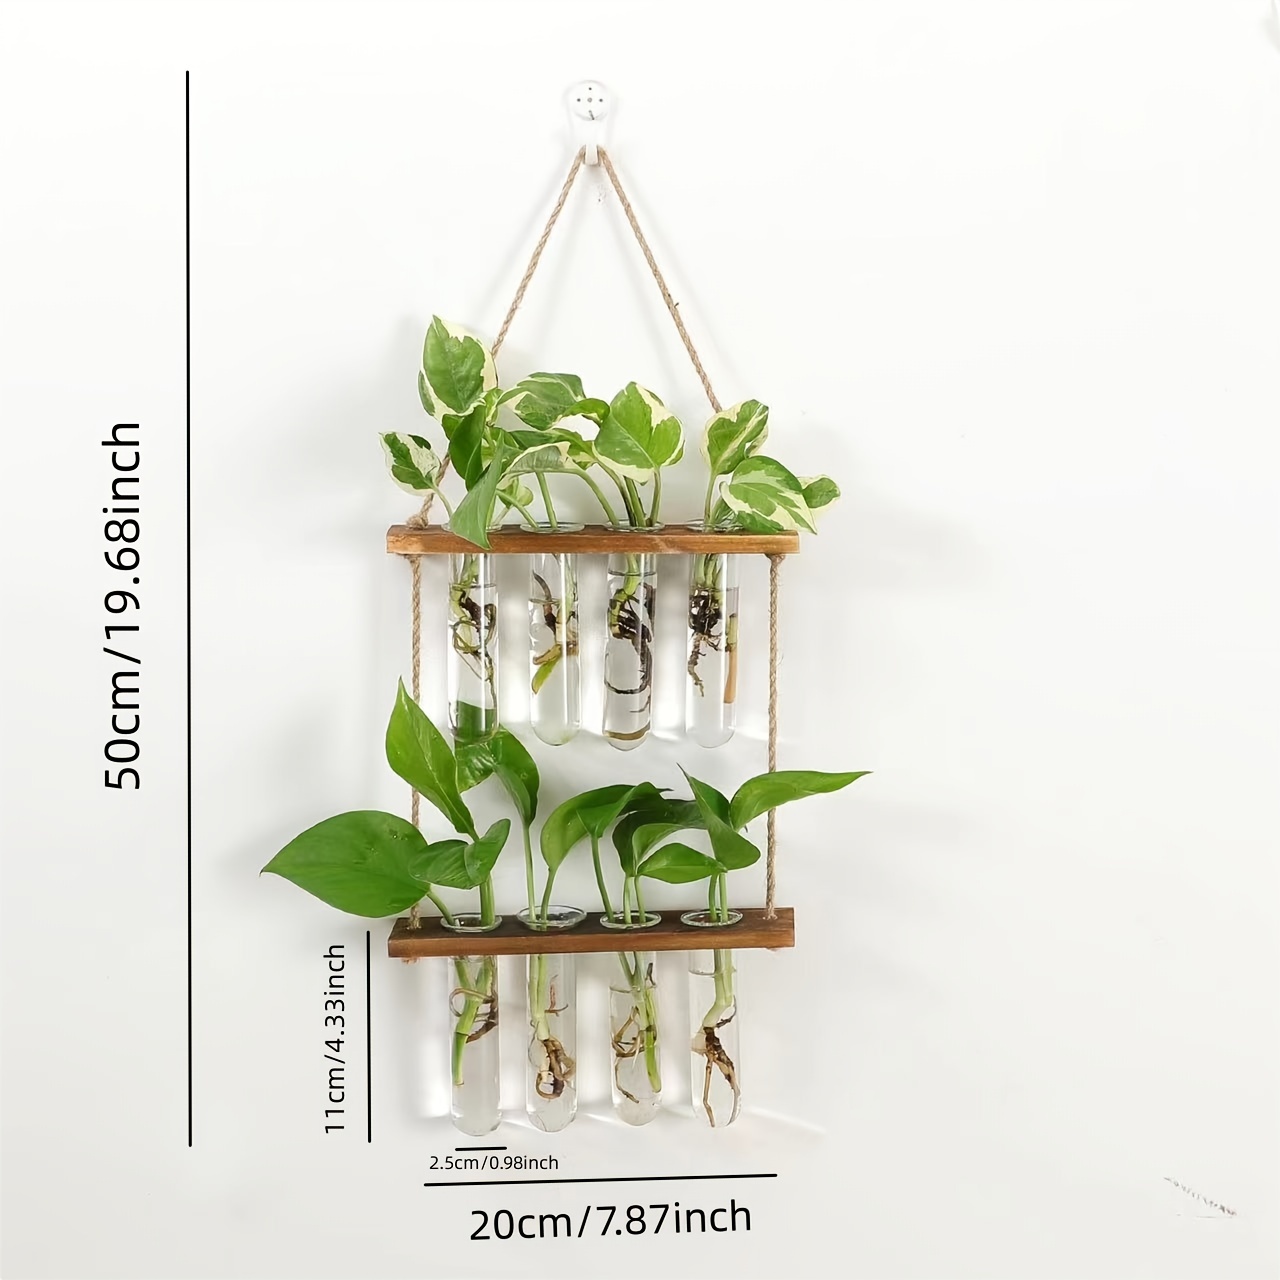 Tabletop Hanging Glass Planter Propagation Station Modern 3 Test Tube  Flower Bud Vase in Wood Stand Rack Tabletop Terrarium for Hydroponic Plants  Cuttings Office Home Decoration, Gift for Plant Lover 